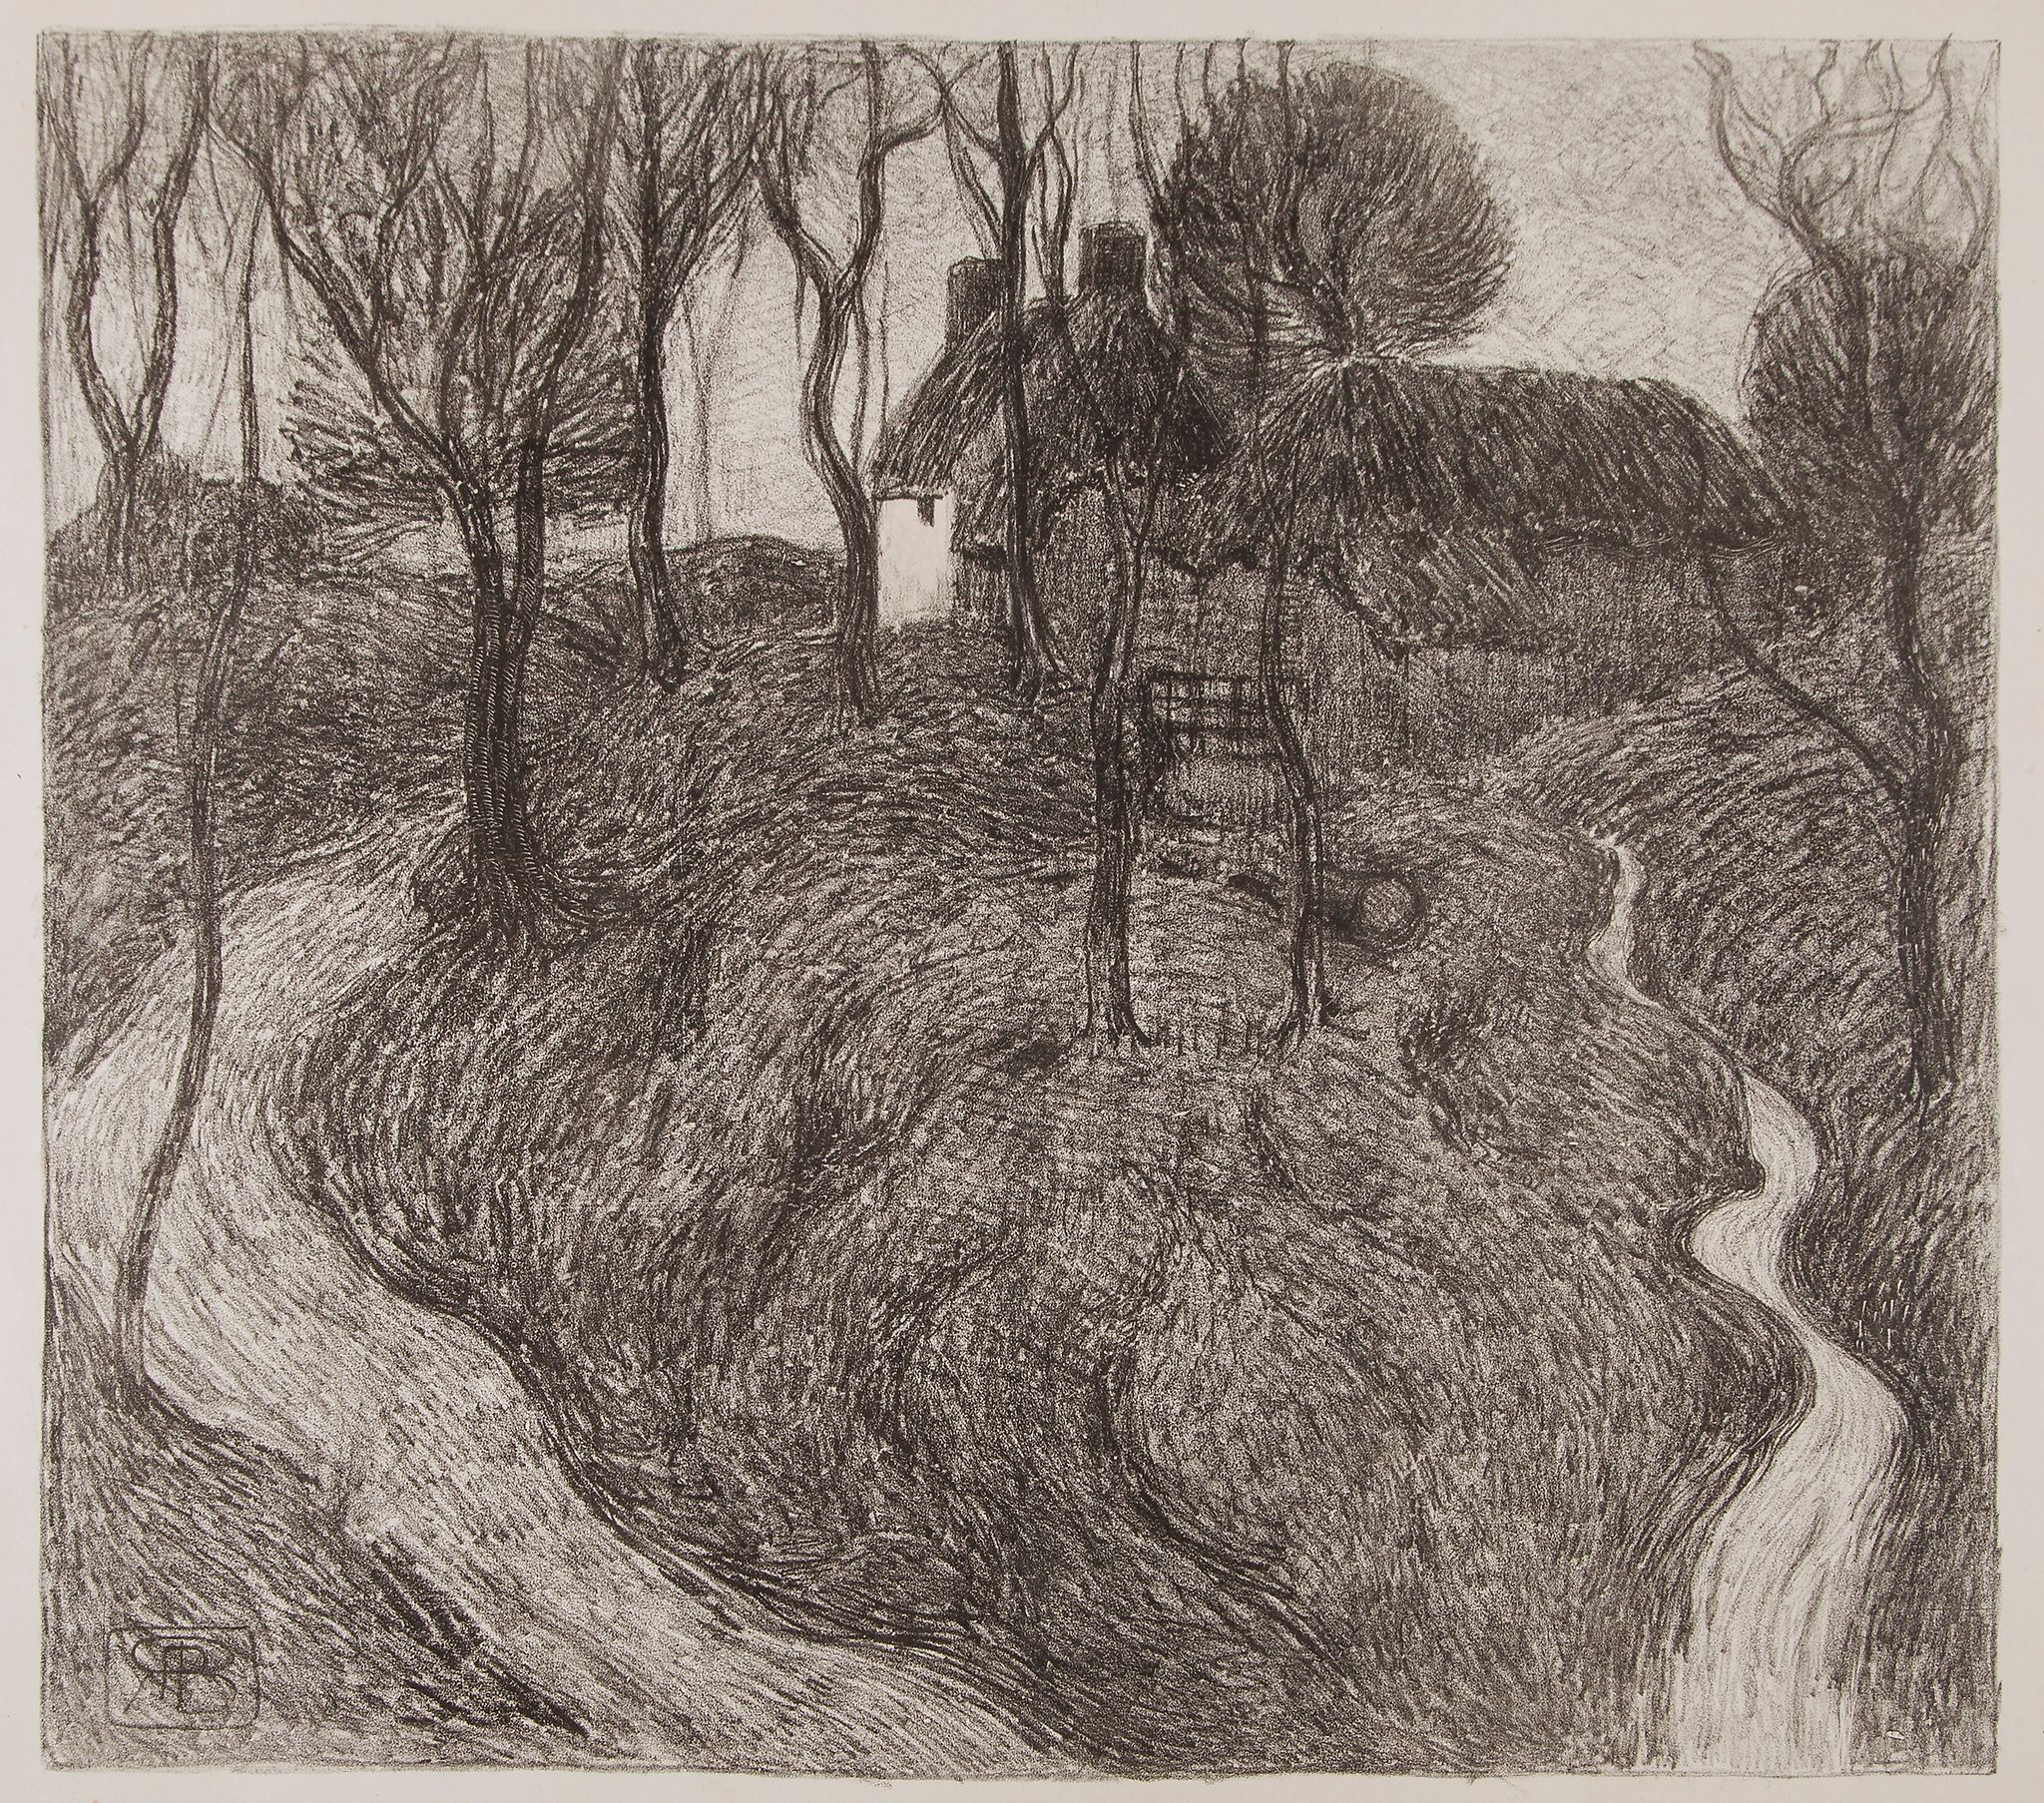 Robert Polhill Bevan (1865-1925) - Hawkridge (D.22) lithograph, c.1900, from the edition of 18, on